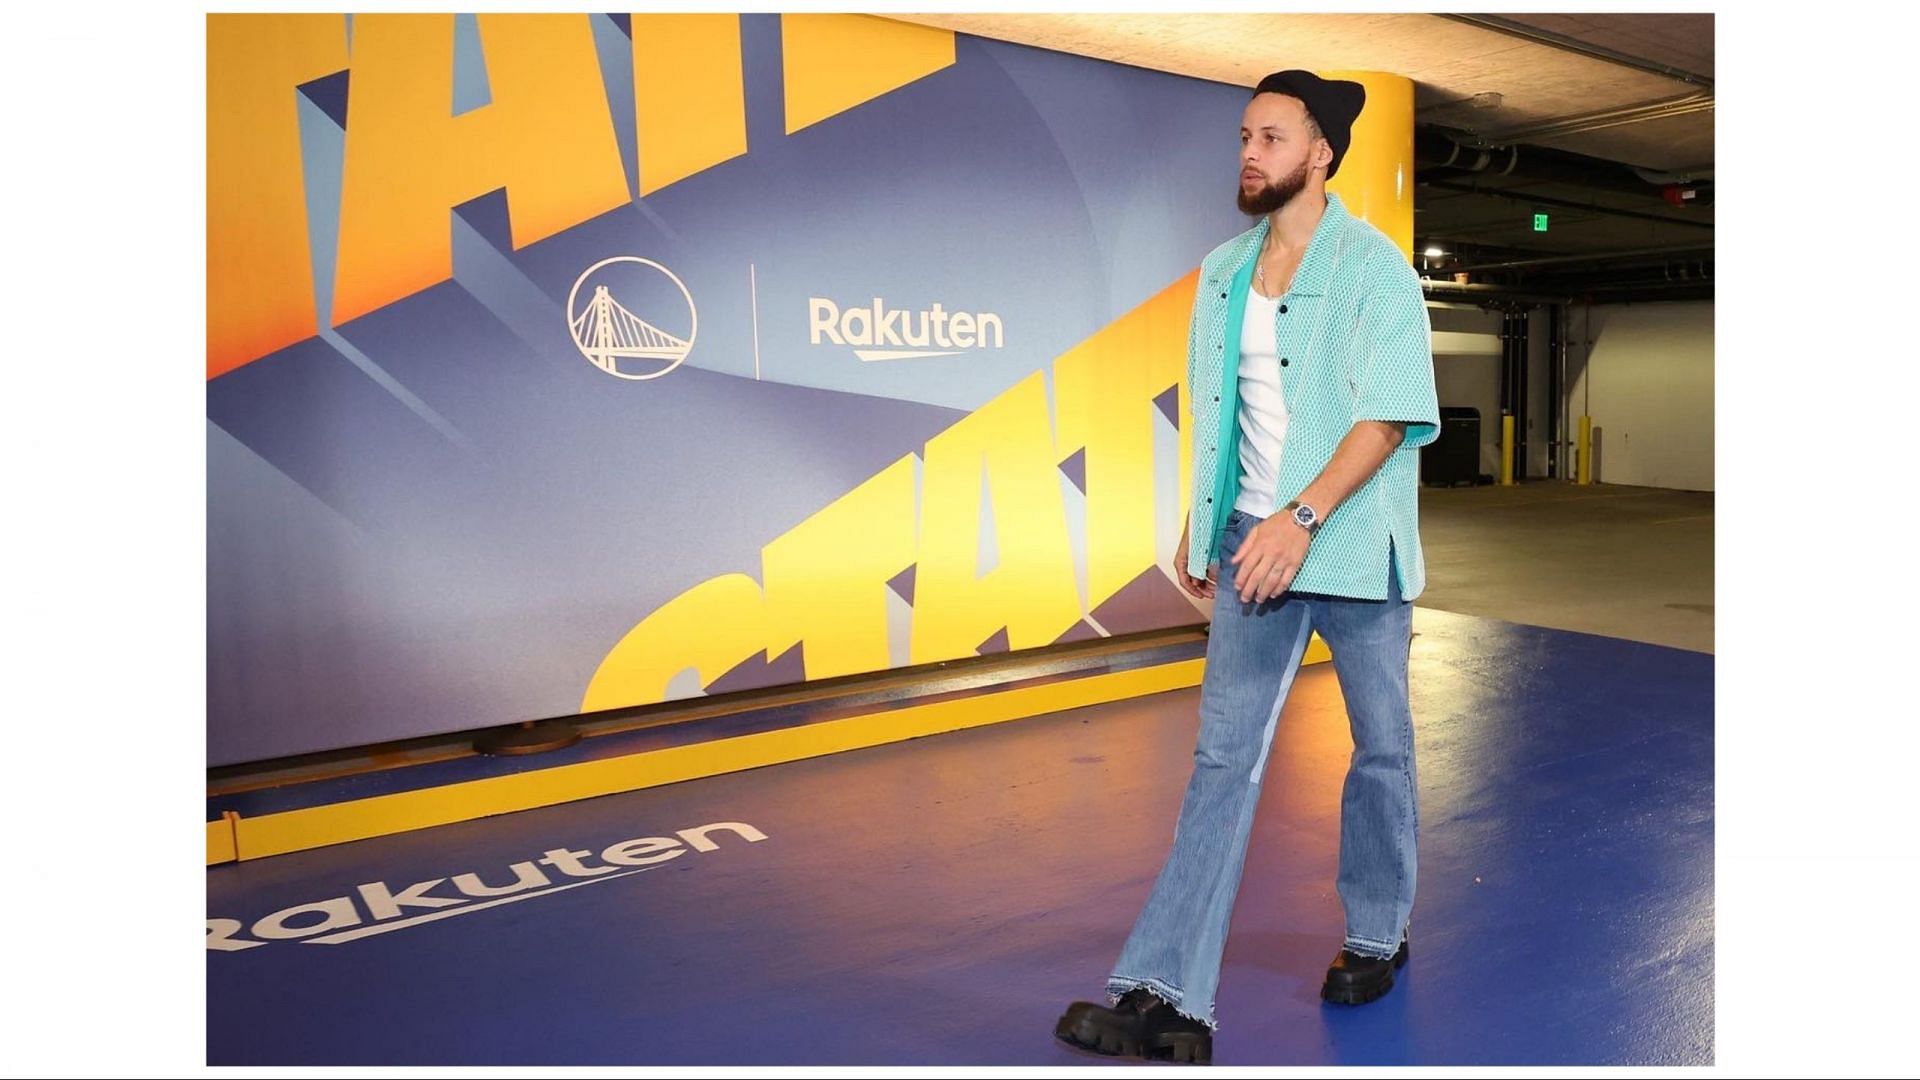 In Photos: Steph Curry assists $10 billion worth Rakuten as he rocks $400 outfit in promotion of black designer